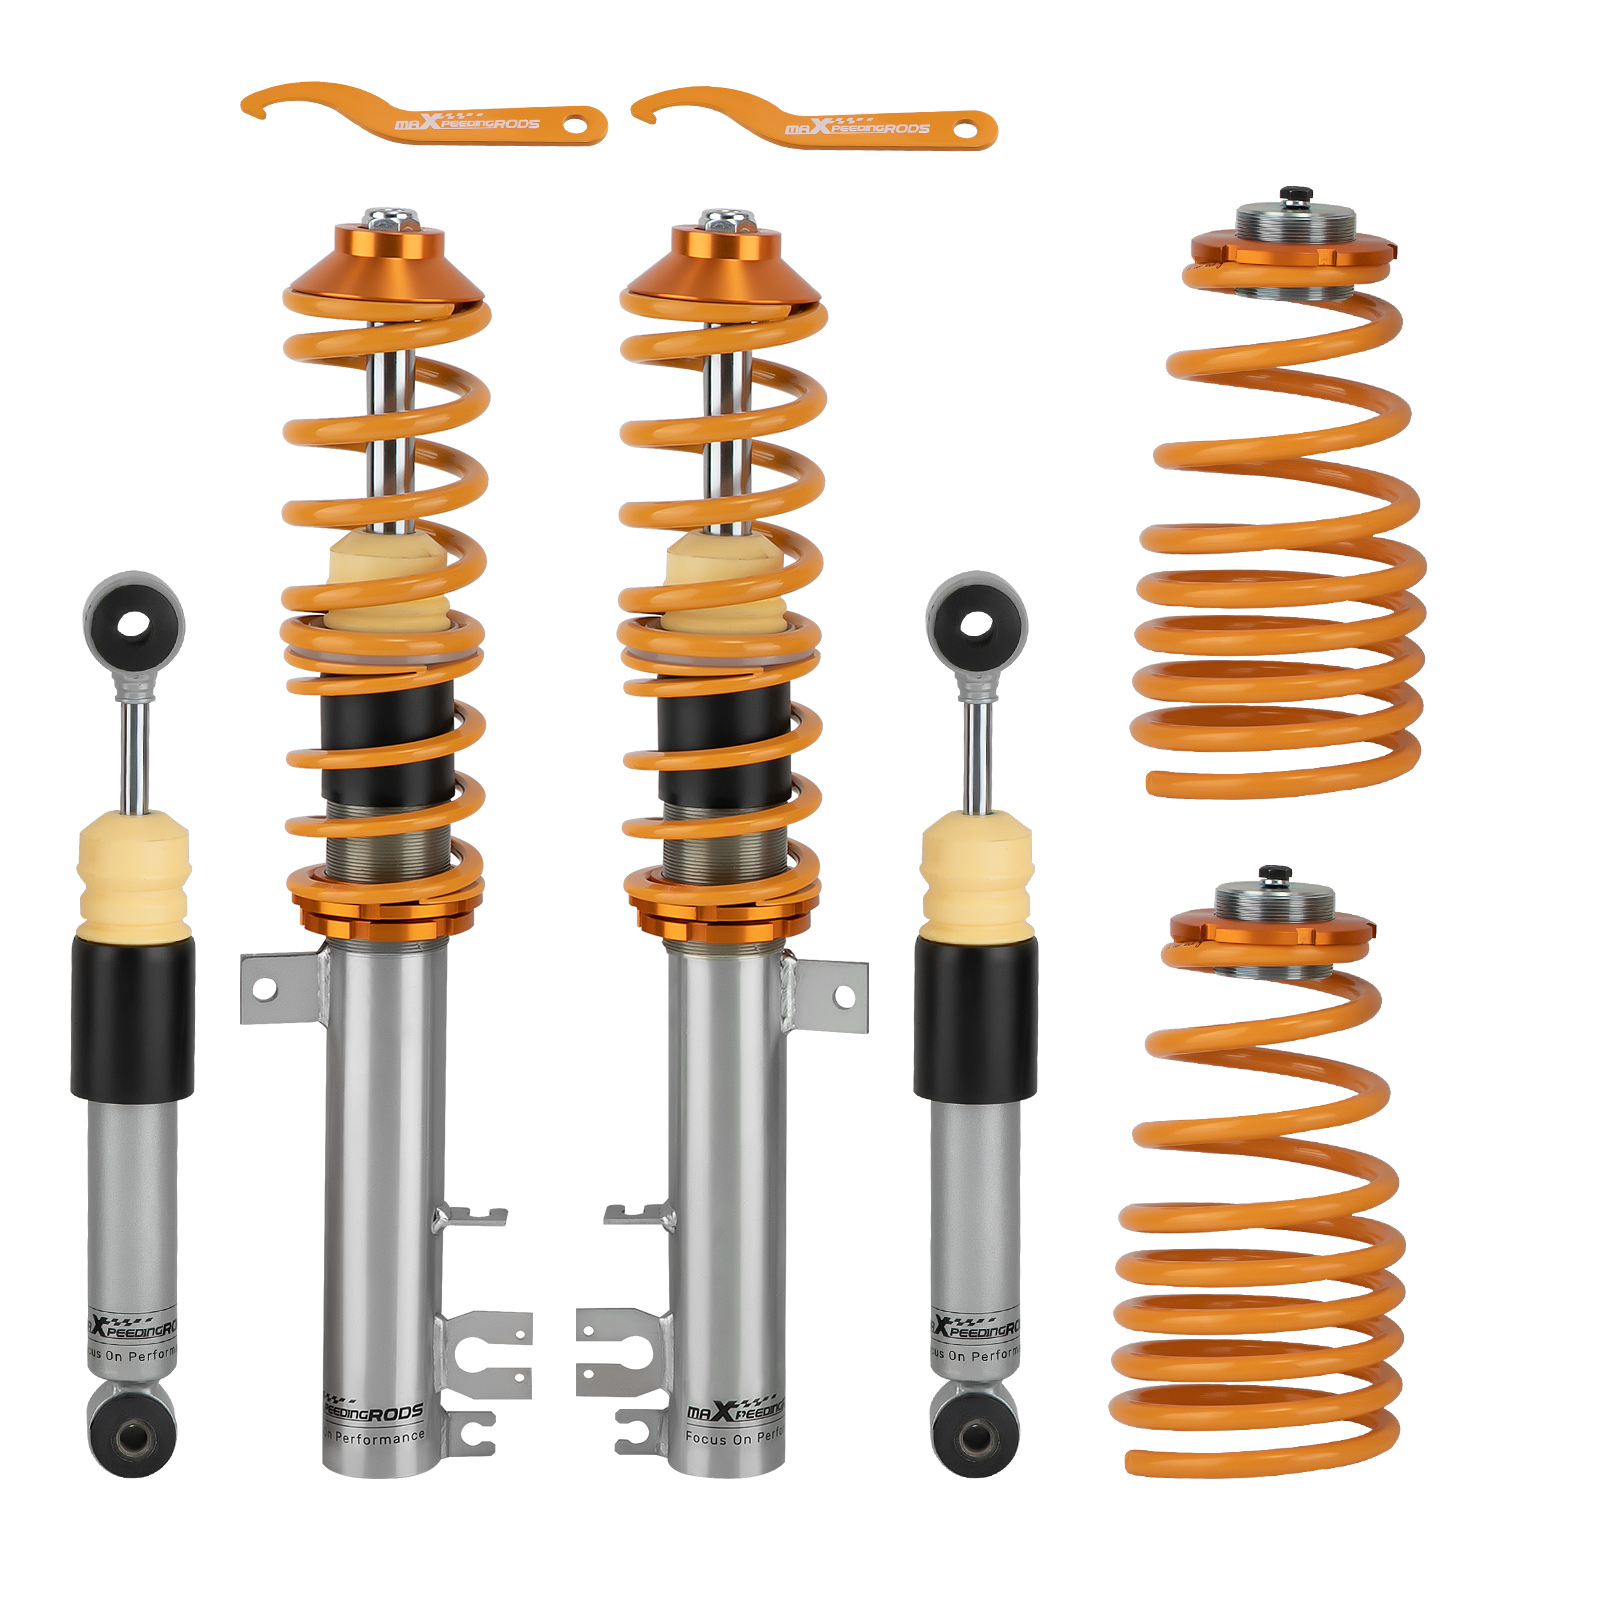 Coilovers Suspension Kit for Fiat 500 Cabriolet 312 abarth 0.9 1.2 1.3 1.4